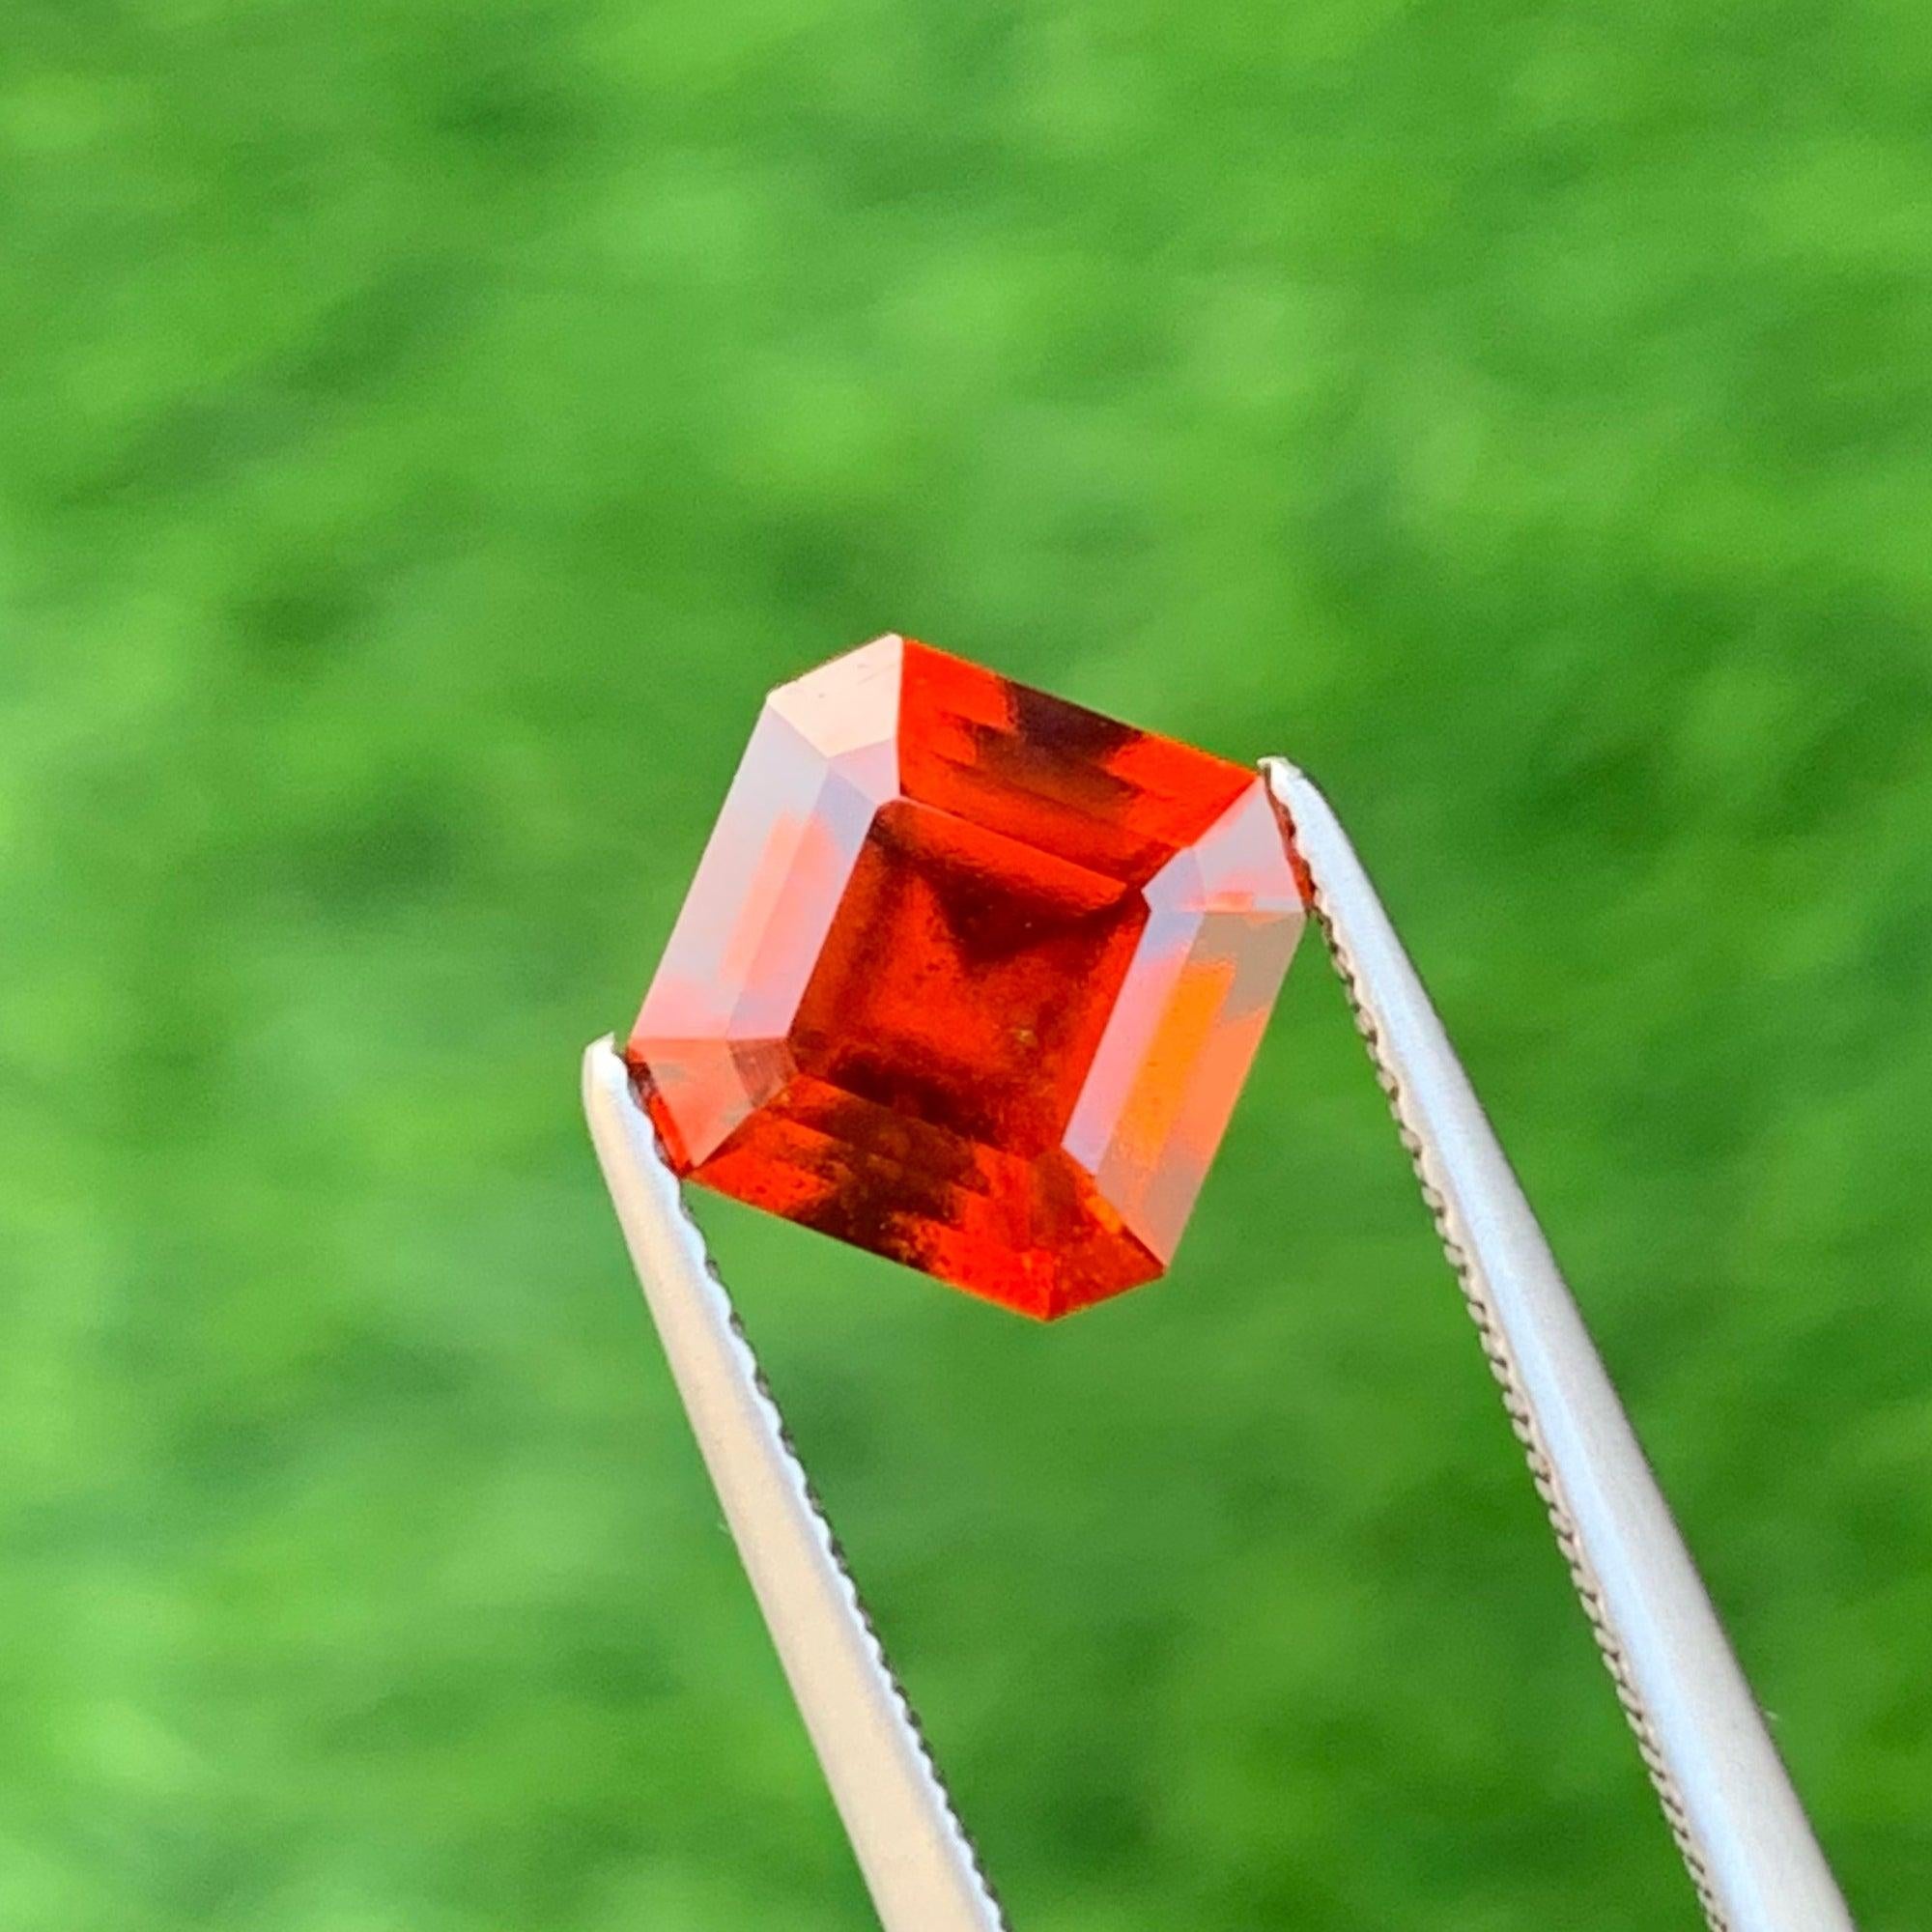 Incredible Orange Hessonite Garnet Gemstone , Available for sale at whole sale price natural high quality 2.90 carats Cloudy Inclusion Clarity Natural Loose Garnet from Madagascar.

Product Information:
GEMSTONE NAME: Incredible Orange Hessonite